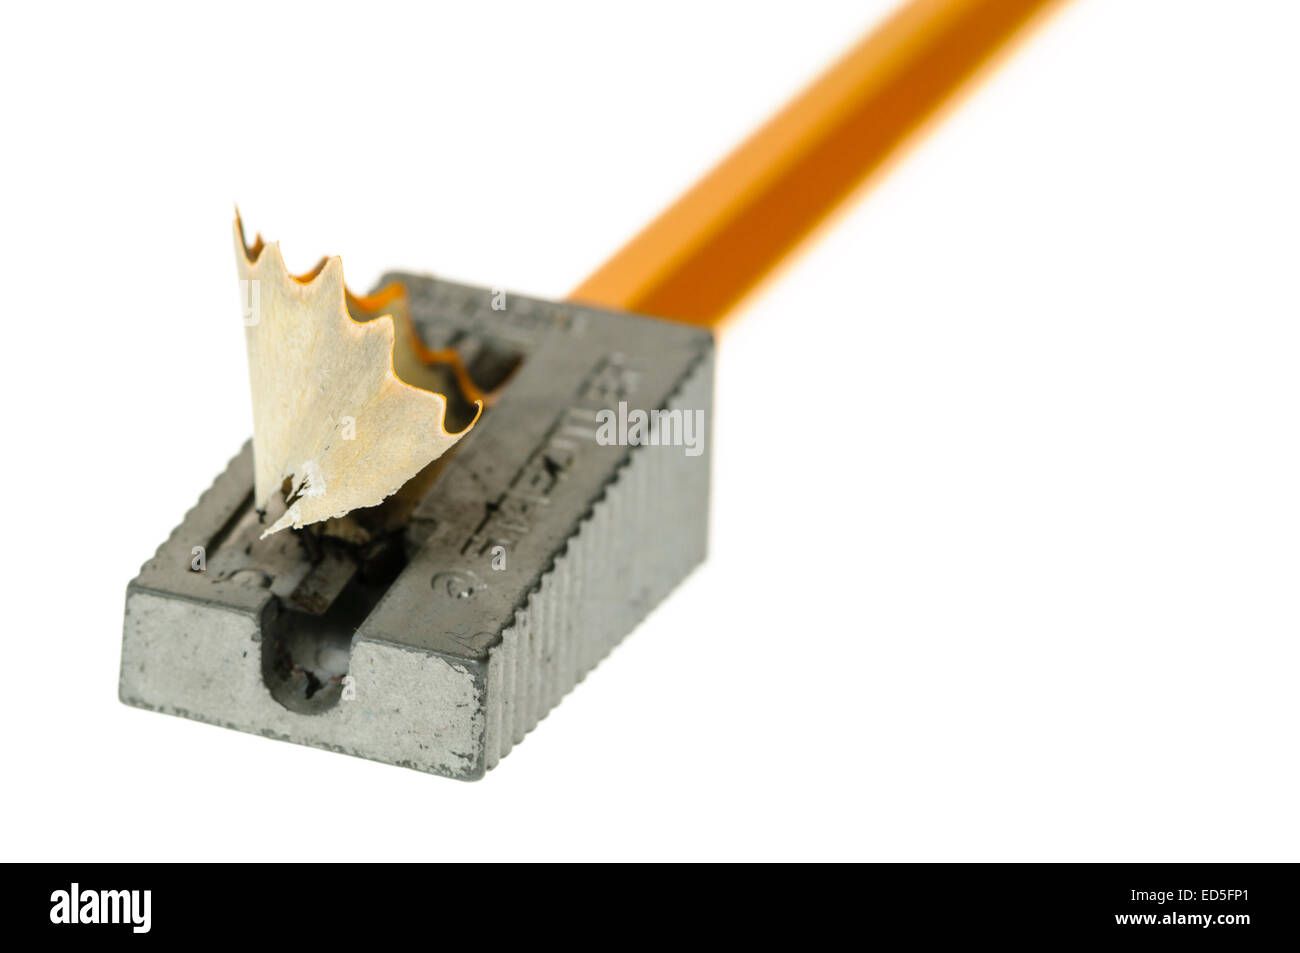 Pencil being sharpened with a small metal handheld sharpener Stock Photo